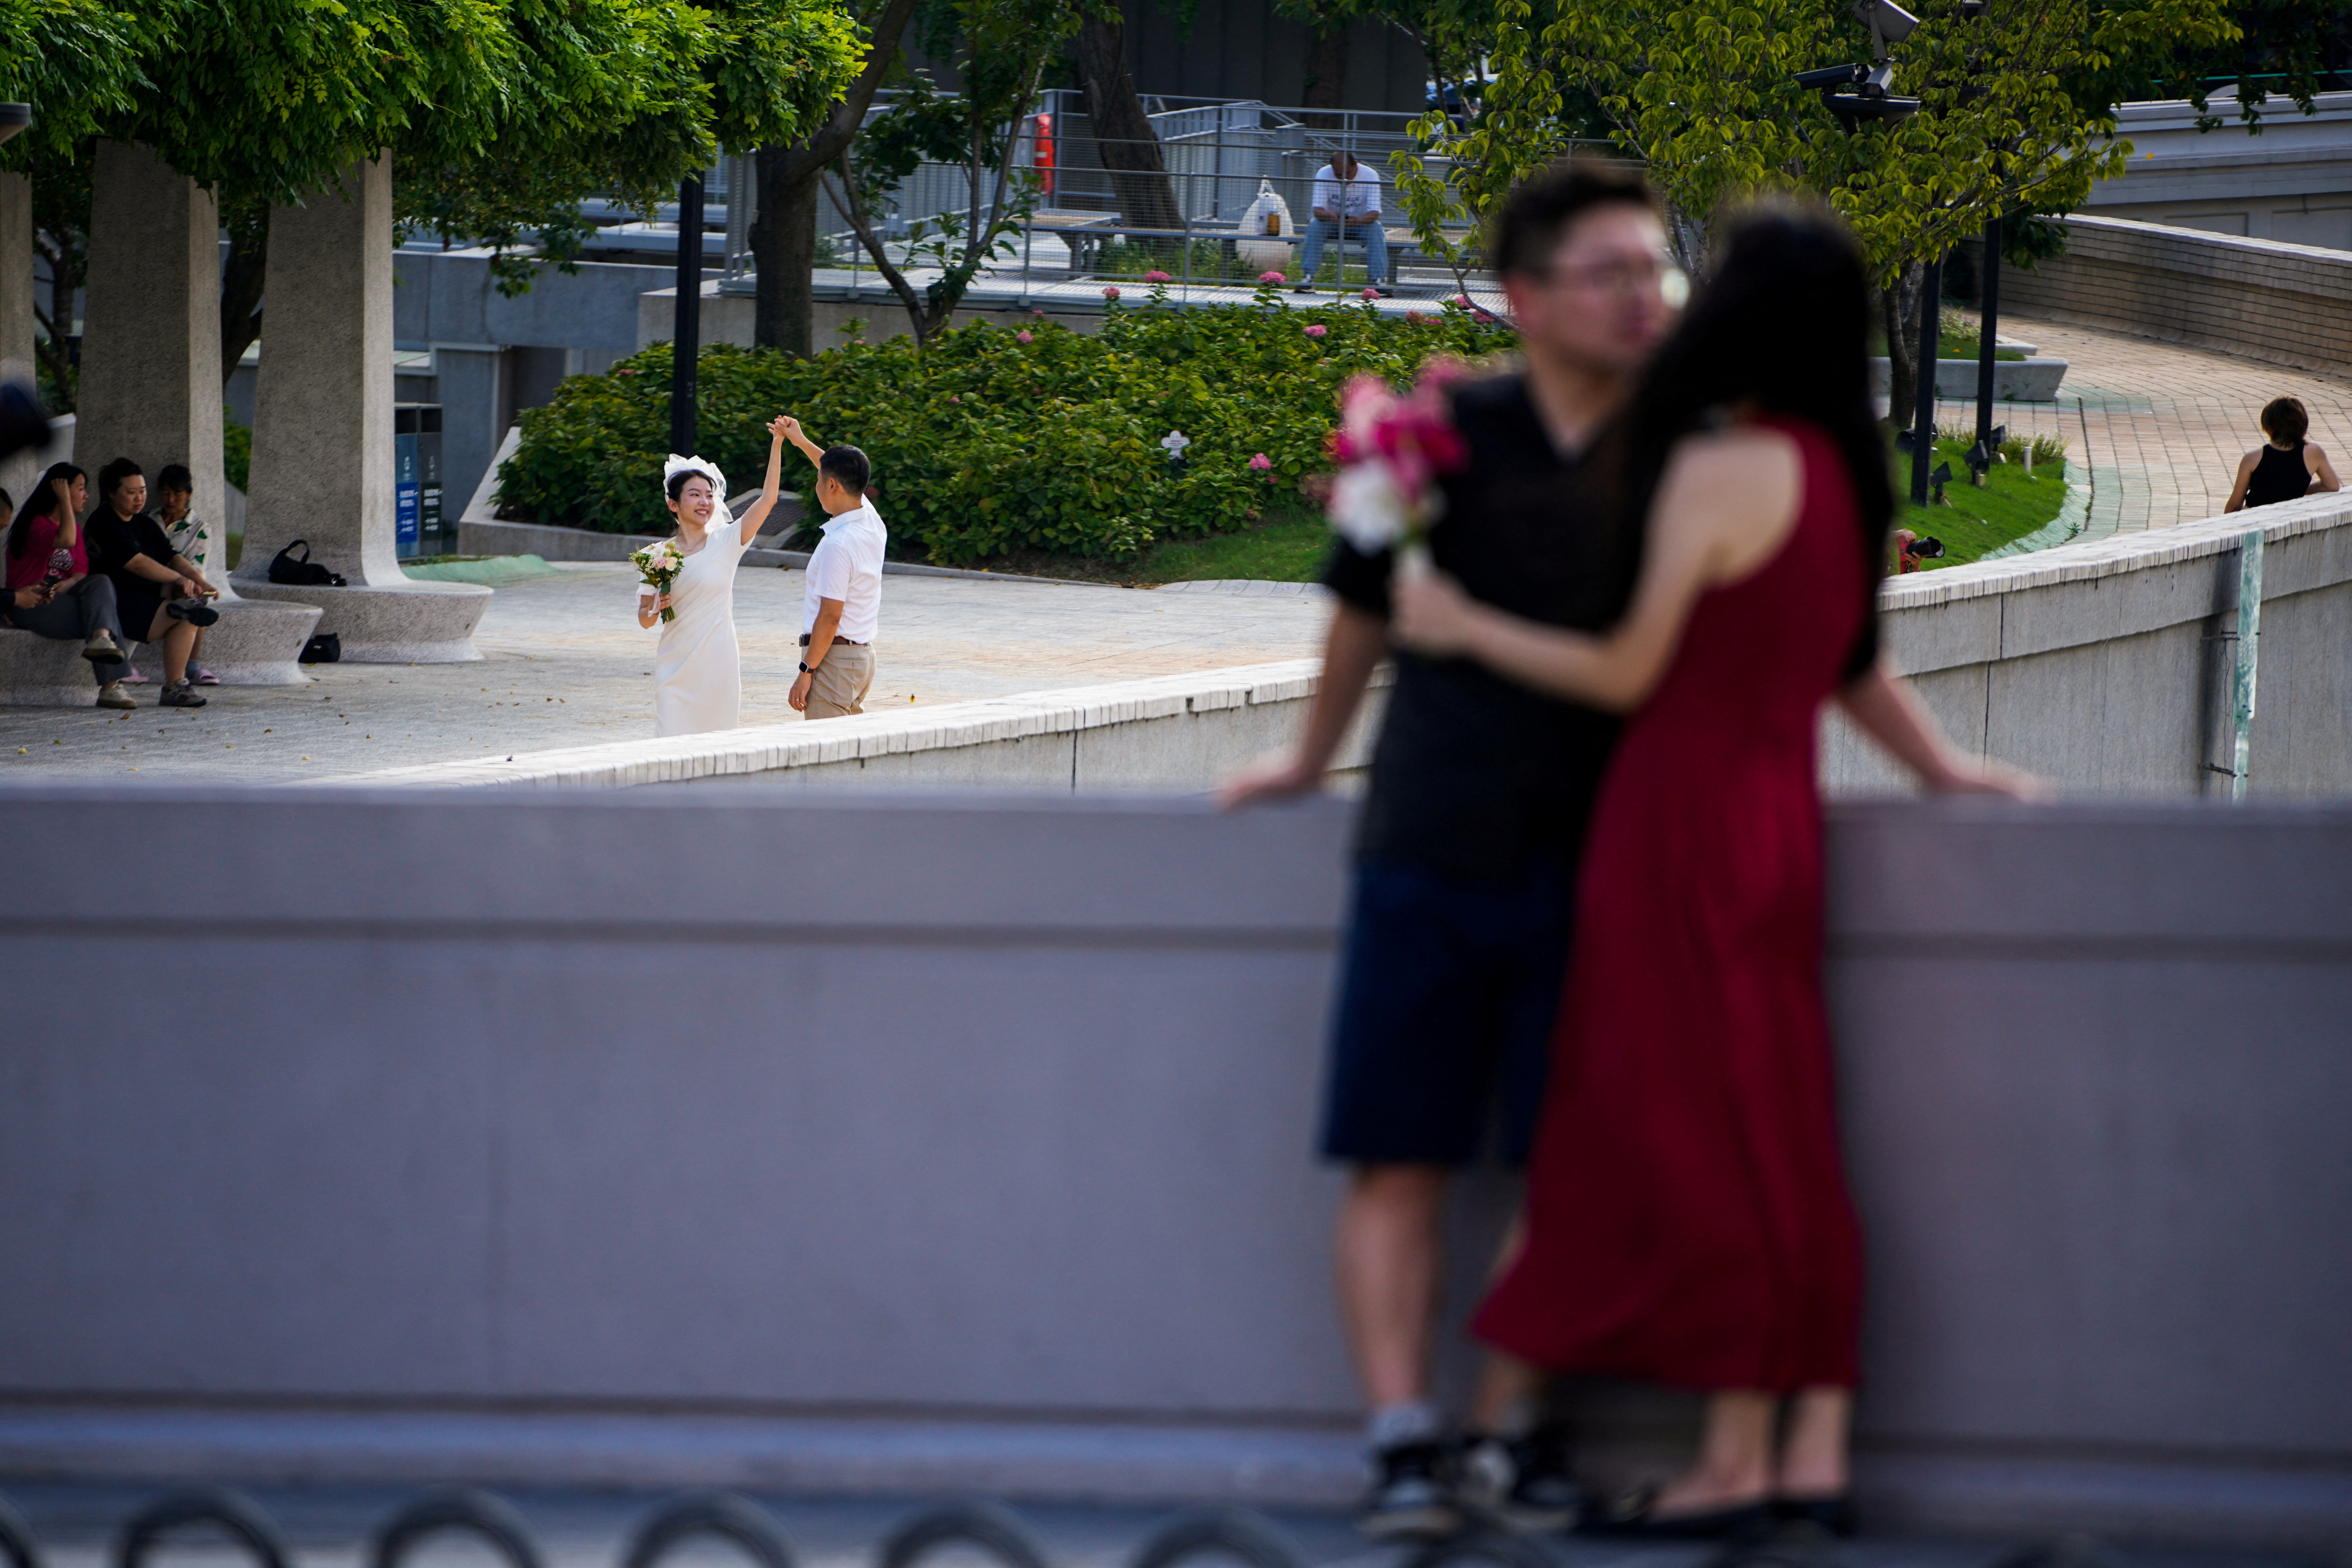 Couples prepare to get their photo taken during a wedding photography shoot on a street, in Shanghai